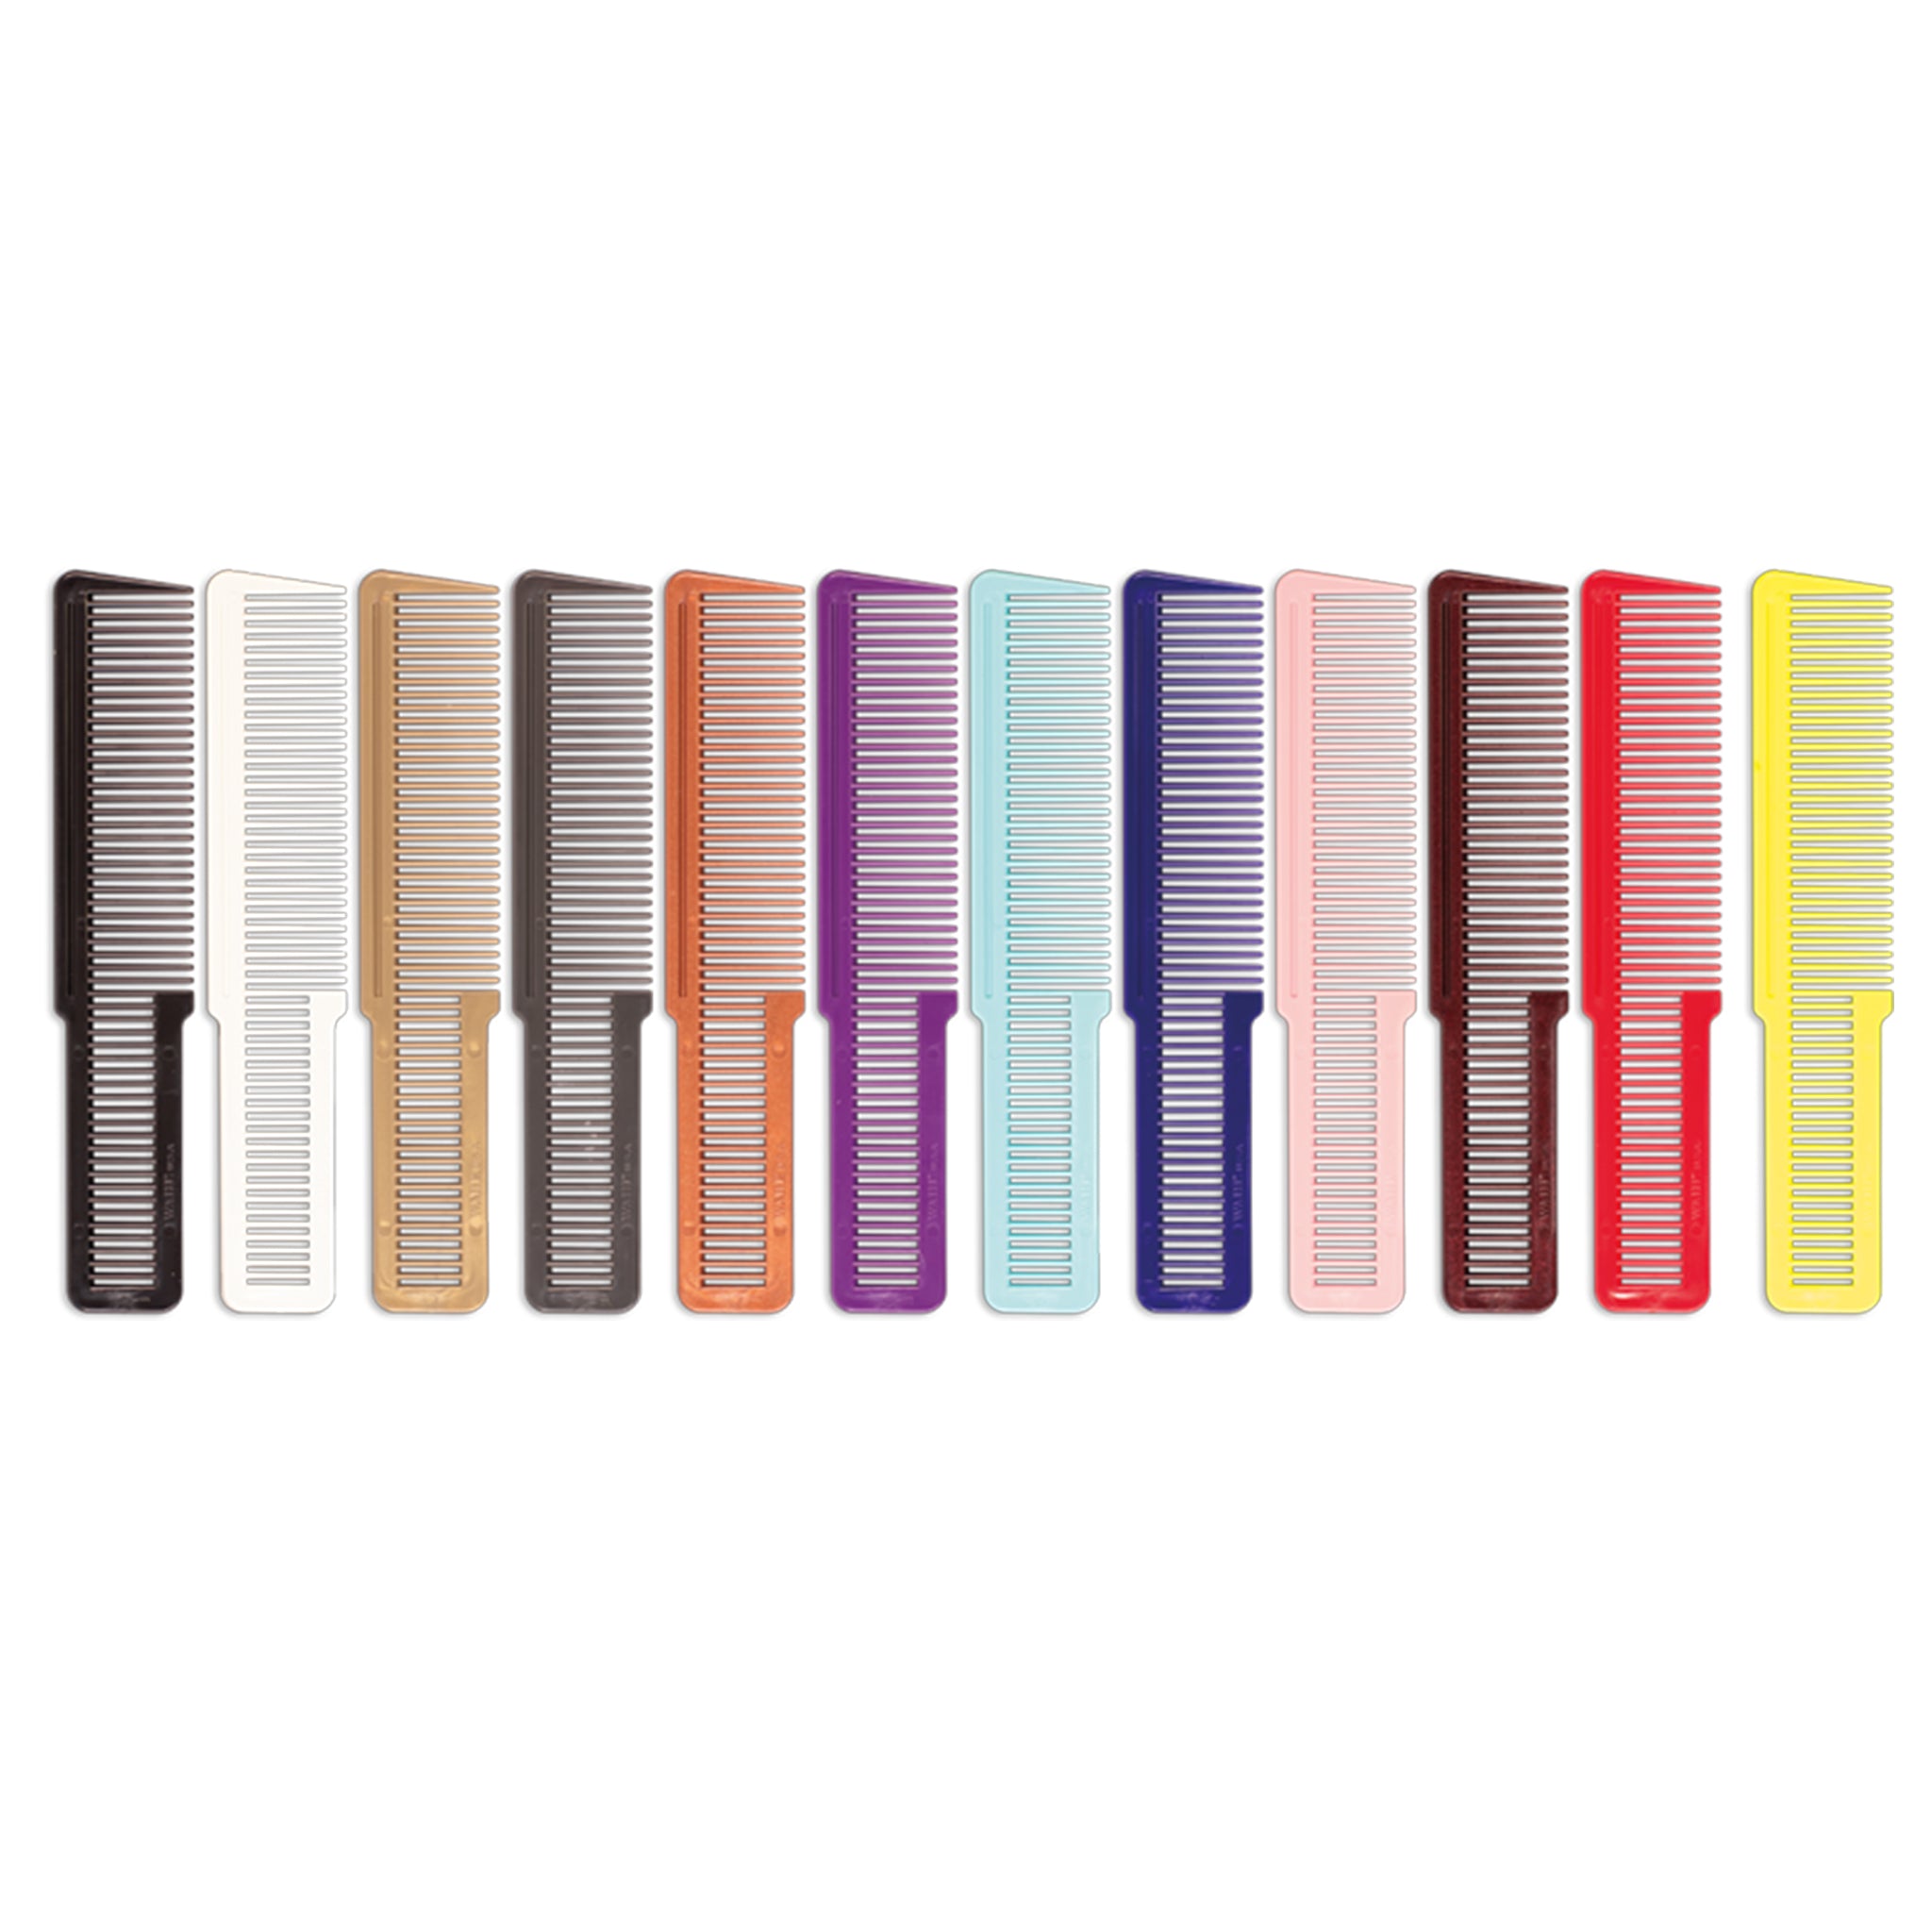 Wahl Clipper Combs - 12 Pack